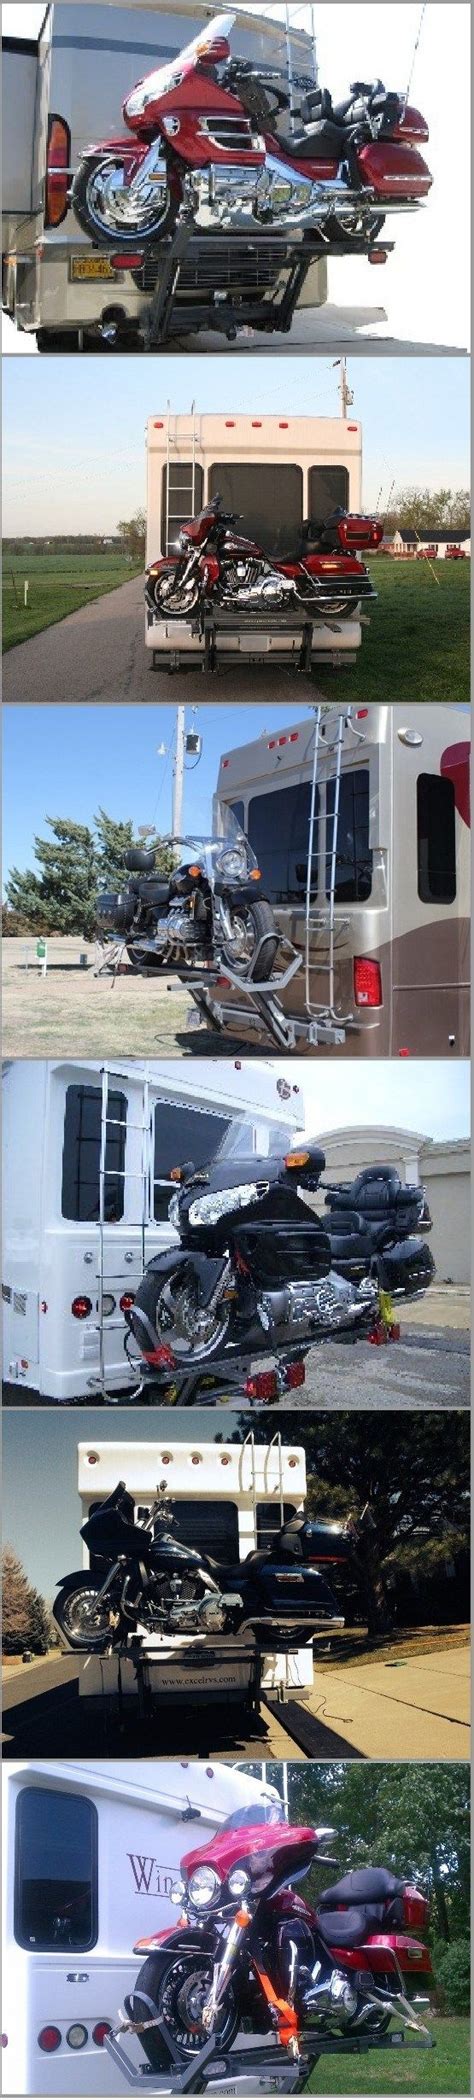 5th Wheel Motorcycle Carrier Lift Hydralift Motorcycle Lifts